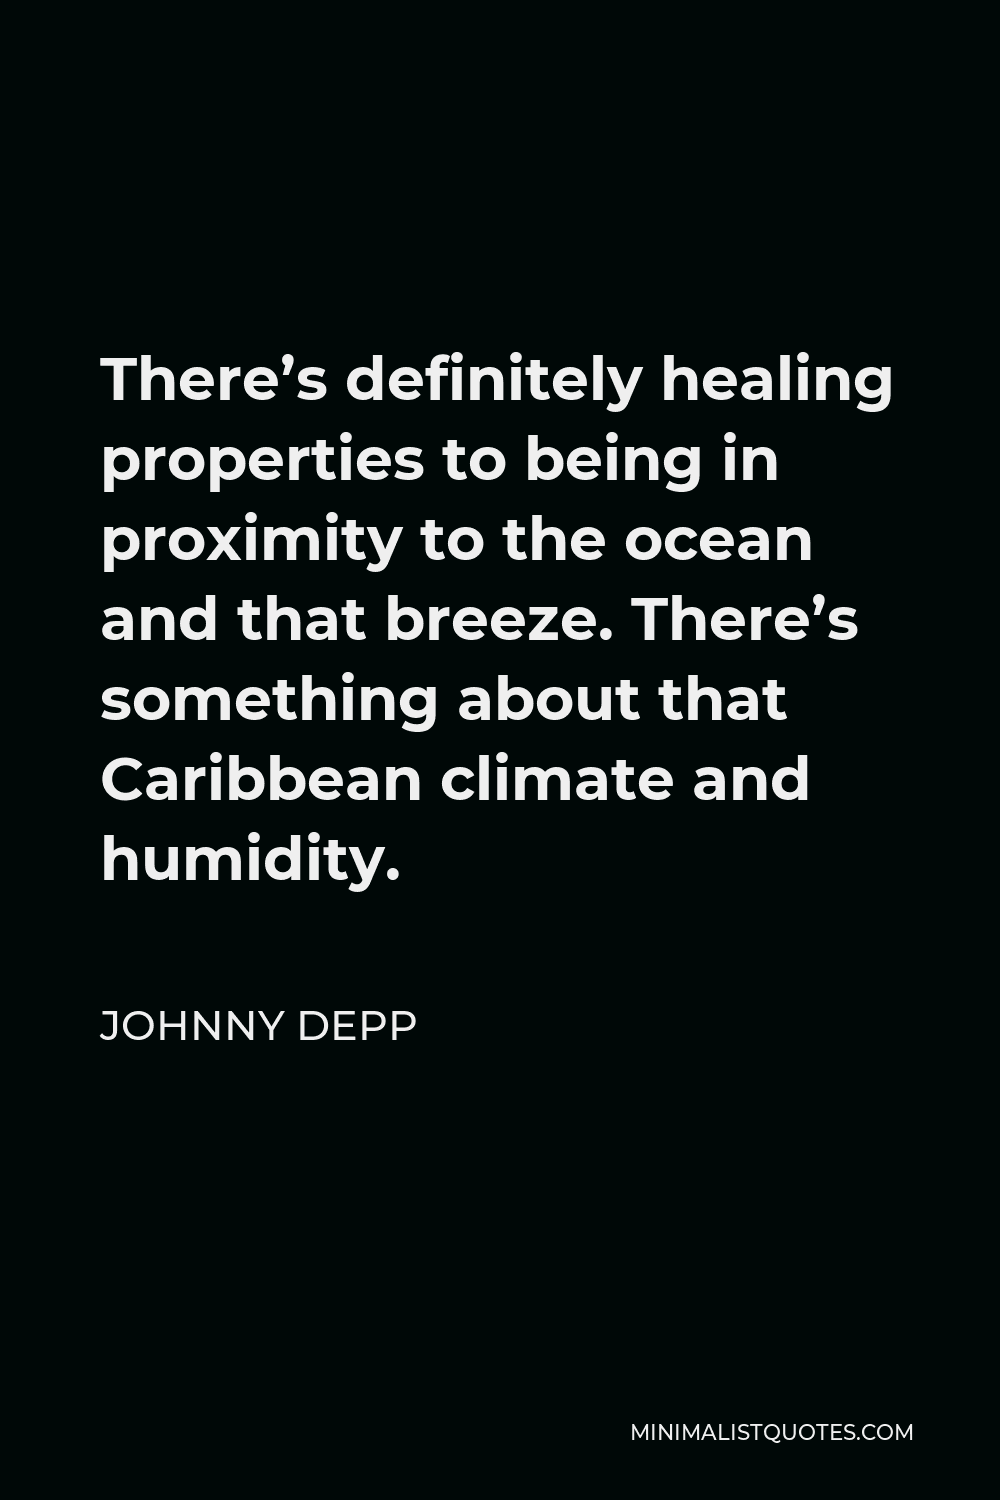 Johnny Depp Quote - There’s definitely healing properties to being in proximity to the ocean and that breeze. There’s something about that Caribbean climate and humidity.